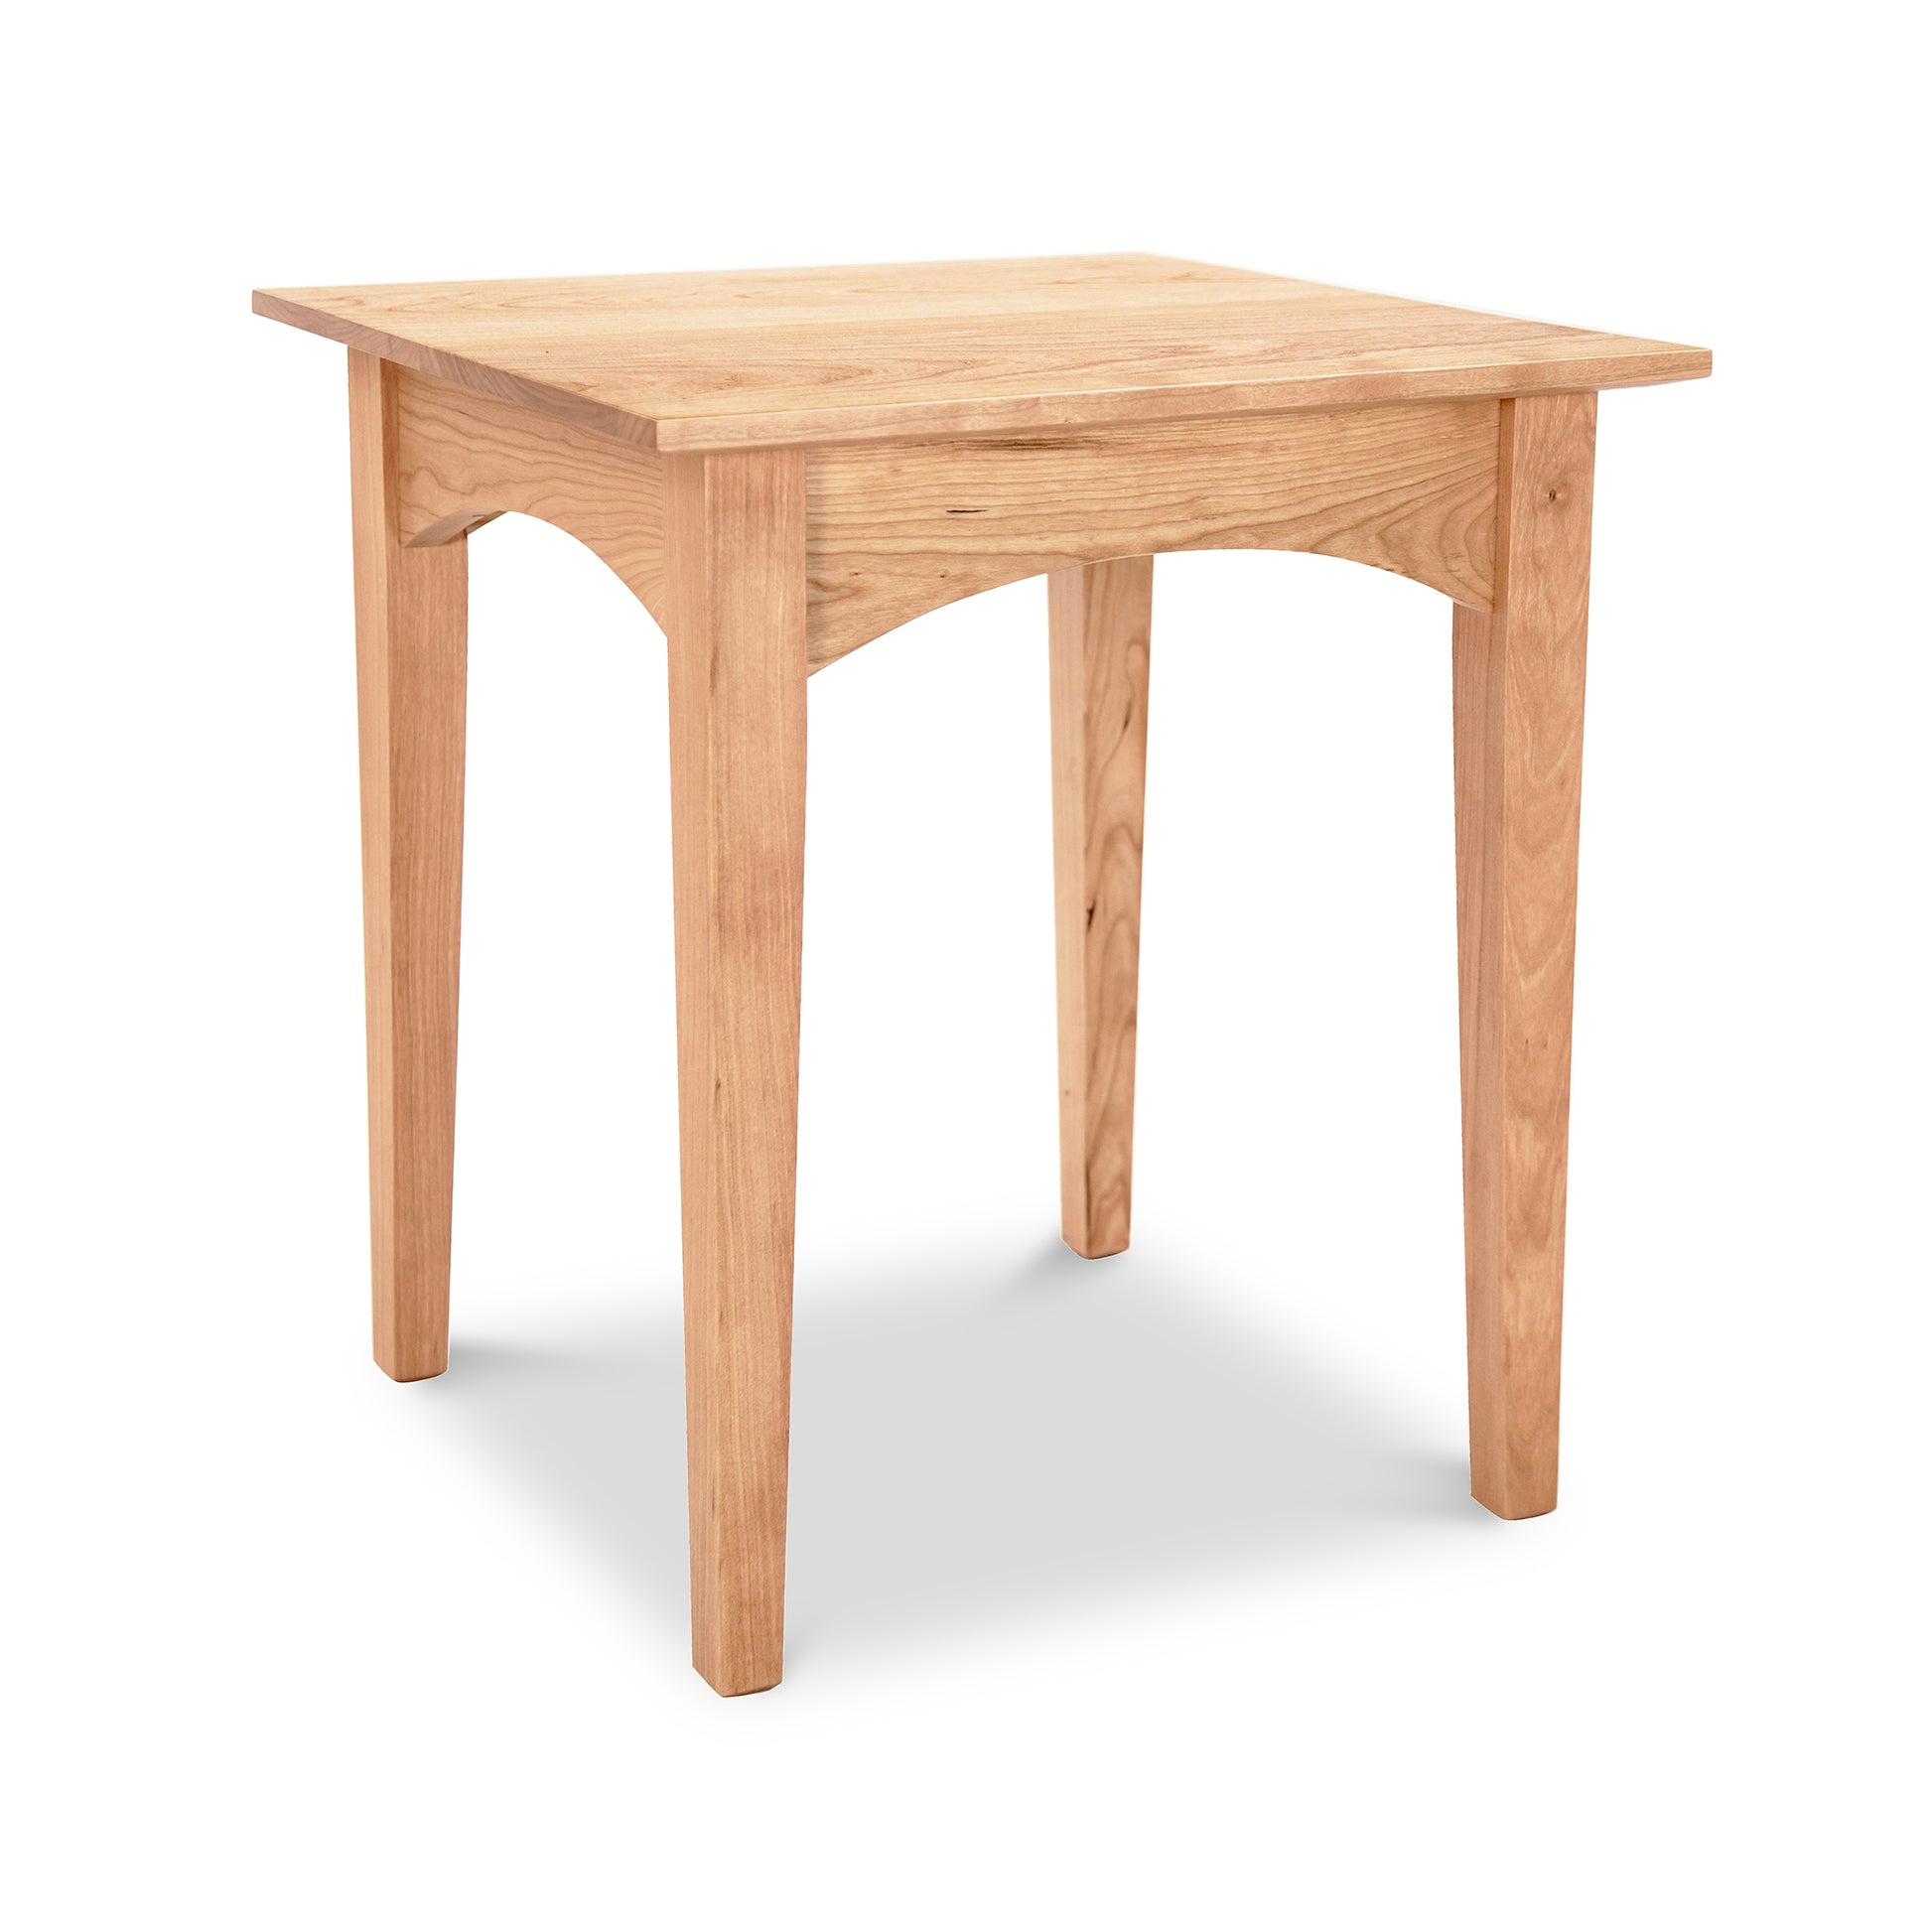 A simple wooden American Shaker End Table with four legs, isolated on a white background. The table is square-shaped and appears to be made of light-colored wood, likely solid natural cherry from Maple Corner Woodworks.